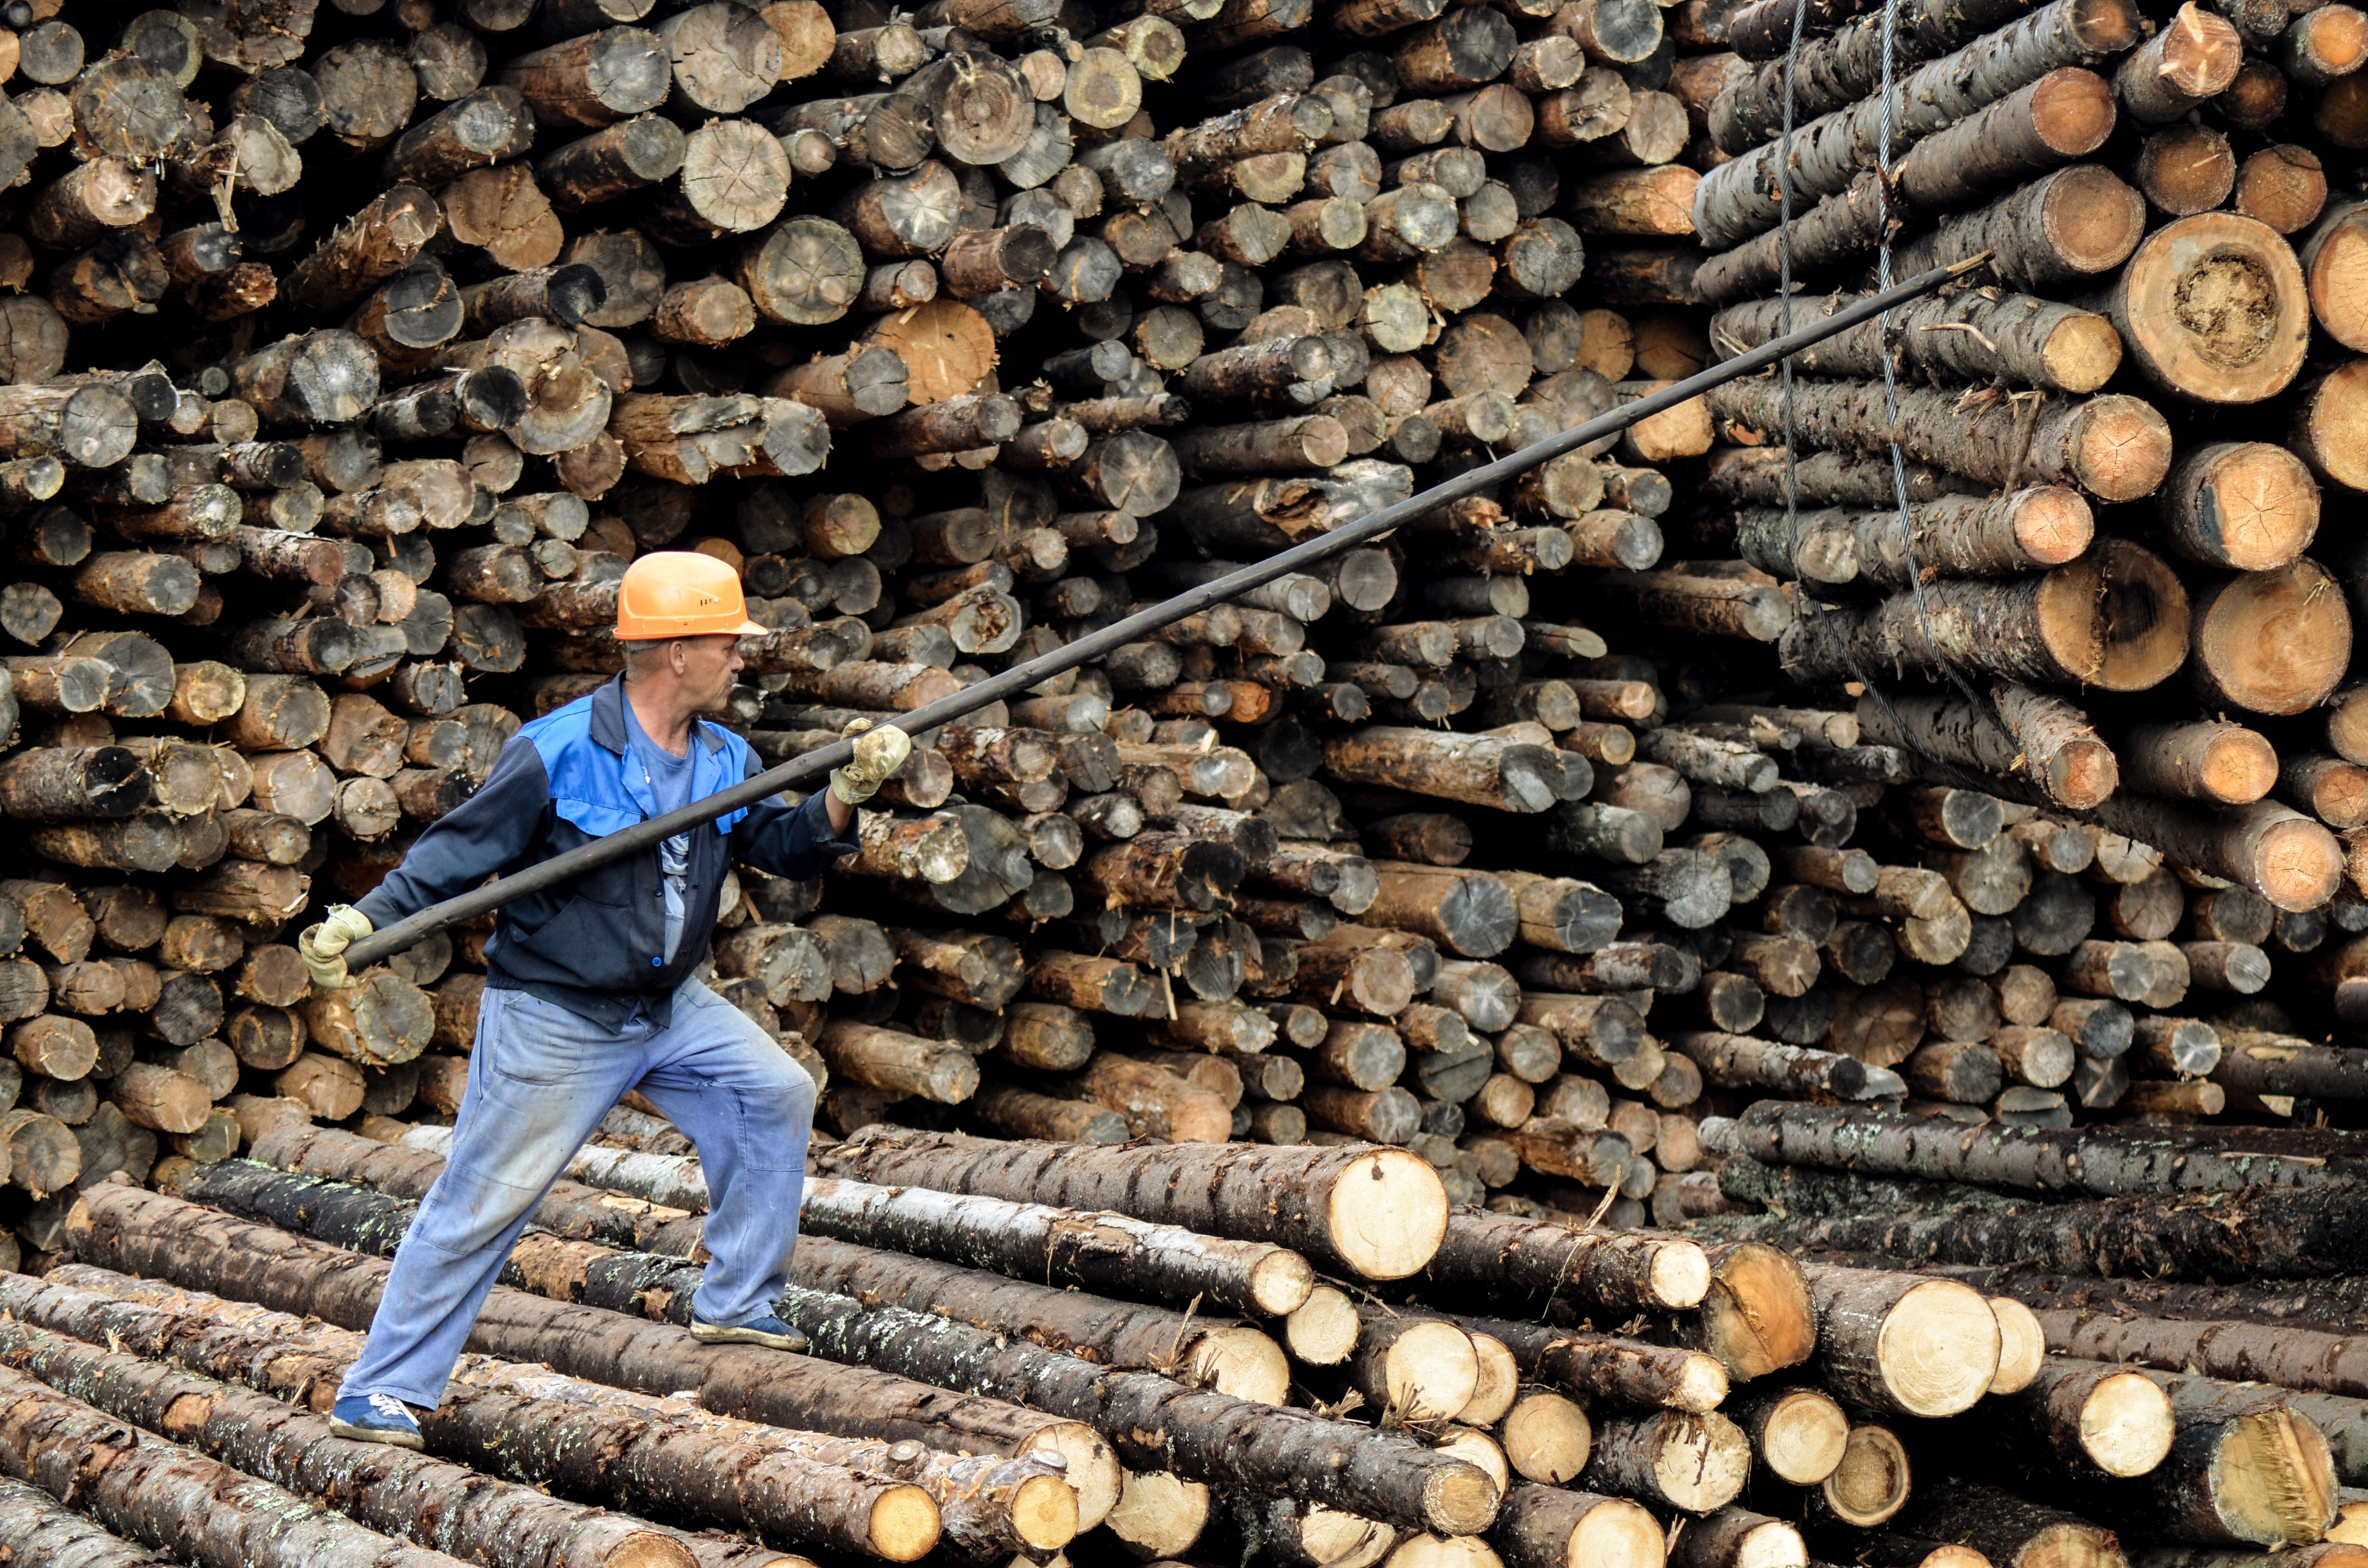 Russia has recently implemented new measures to increase transparency on timber legality.